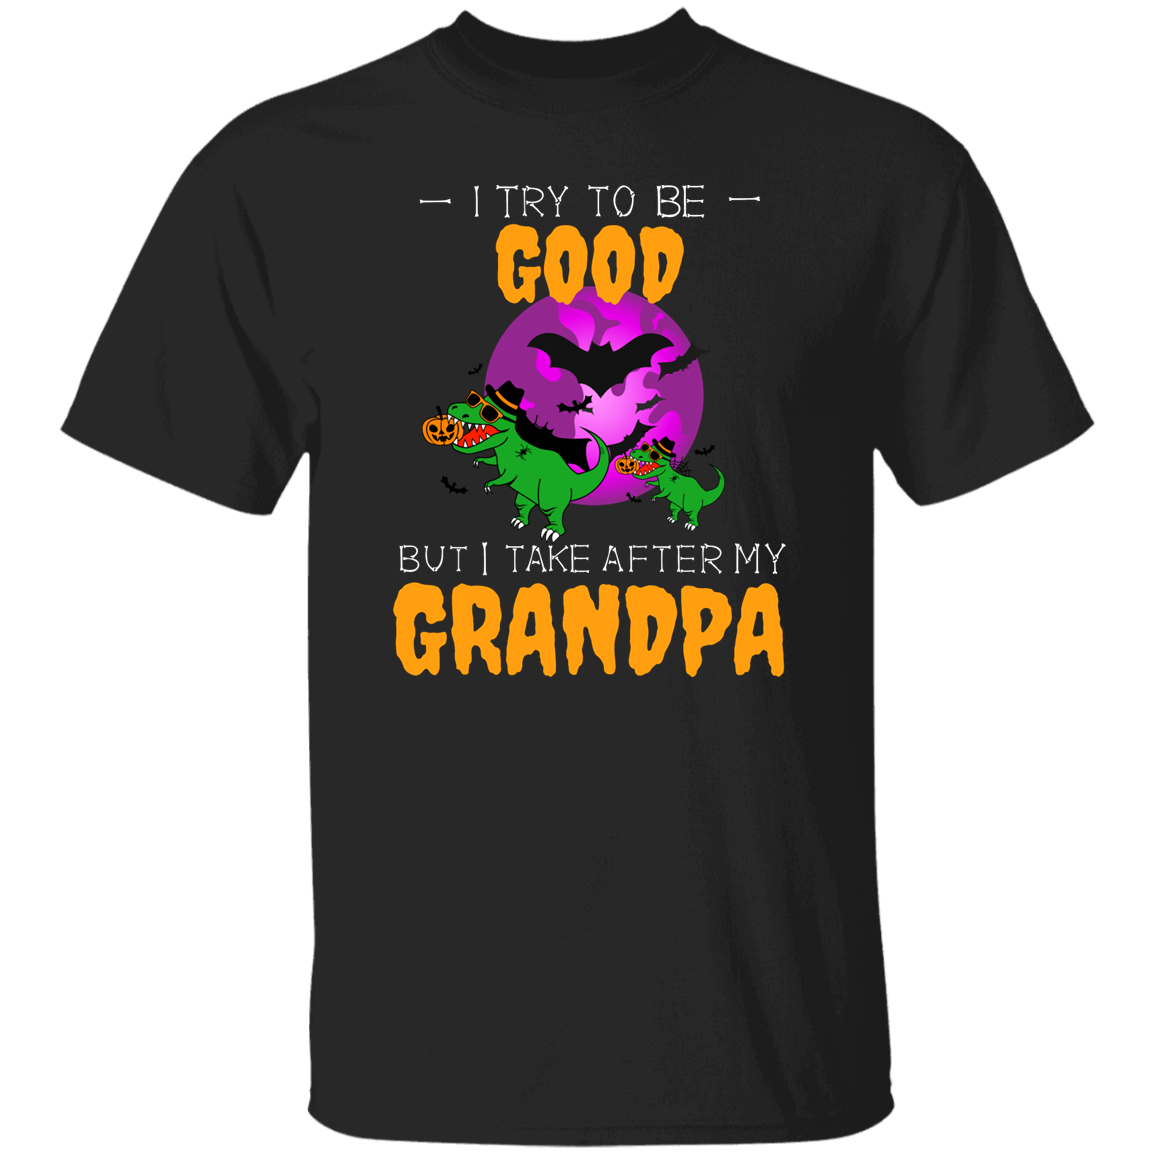 I Try to Be Good | Adult 5.3 oz. T-Shirt